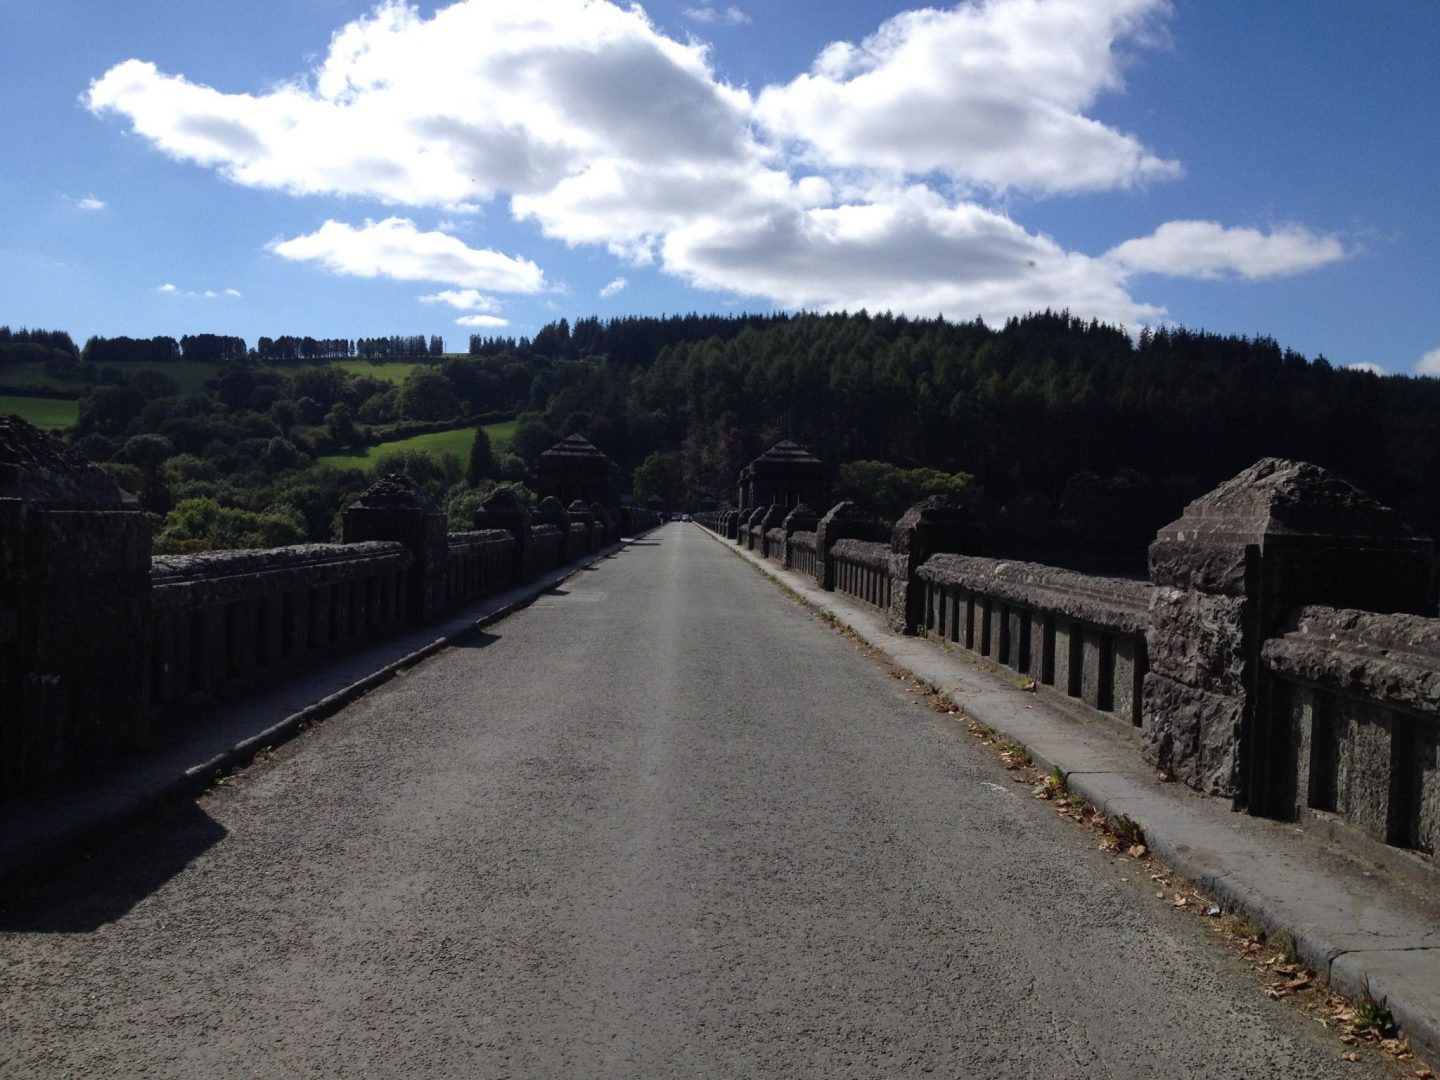 Driving over the bridge at Lake Vyrnwy, Wales